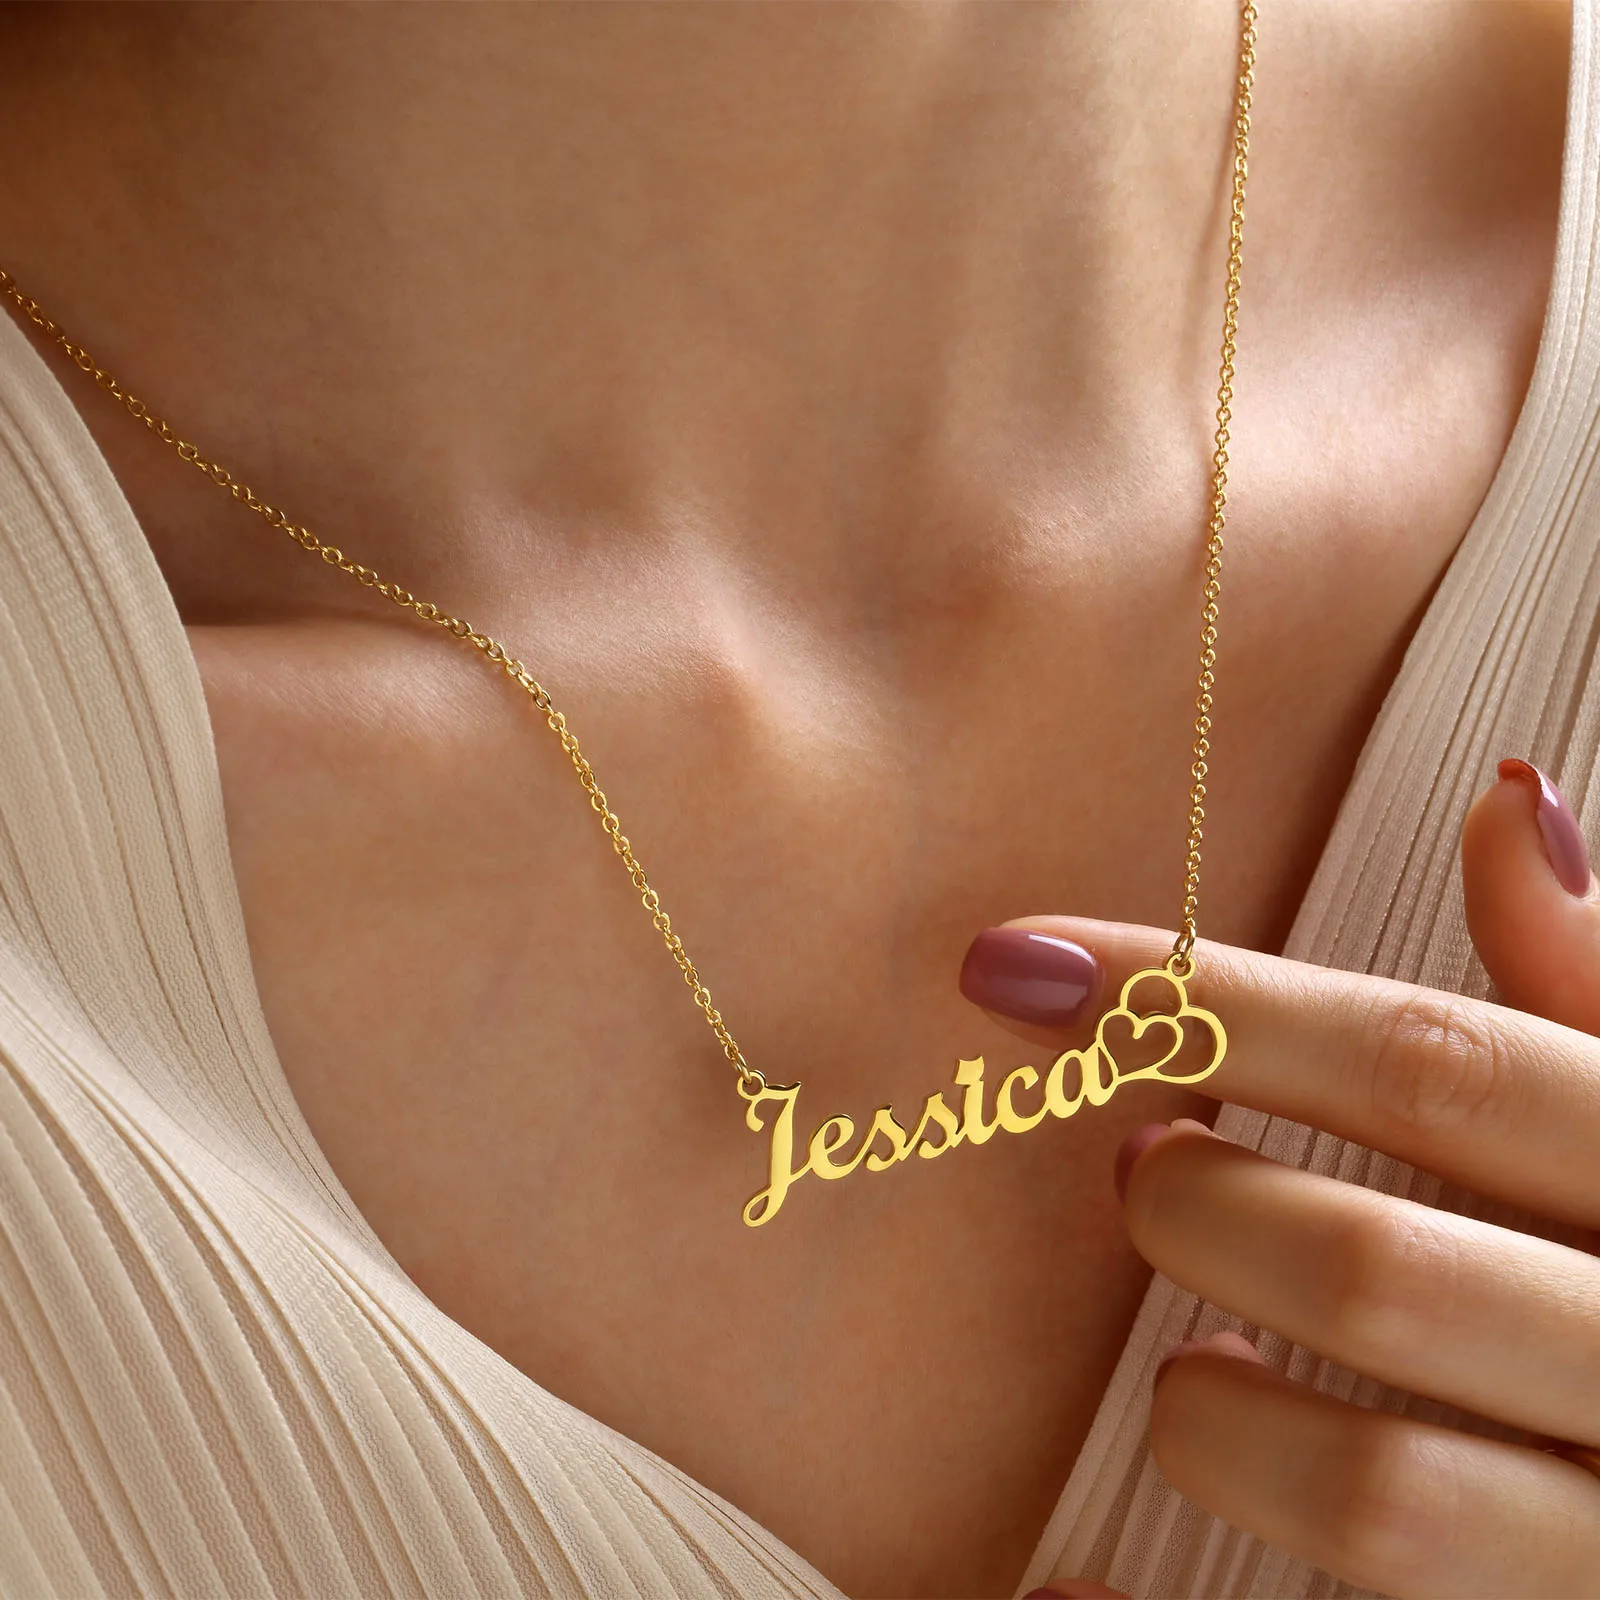 Vnox Customized Name Necklaces for Women, Nameplate Heart Pendant, Elegant Personalized Anniversary Gift for Her personalized name bookmark custom heart page corner bookmark leather book mark for readers anniversary gift wedding gift for her